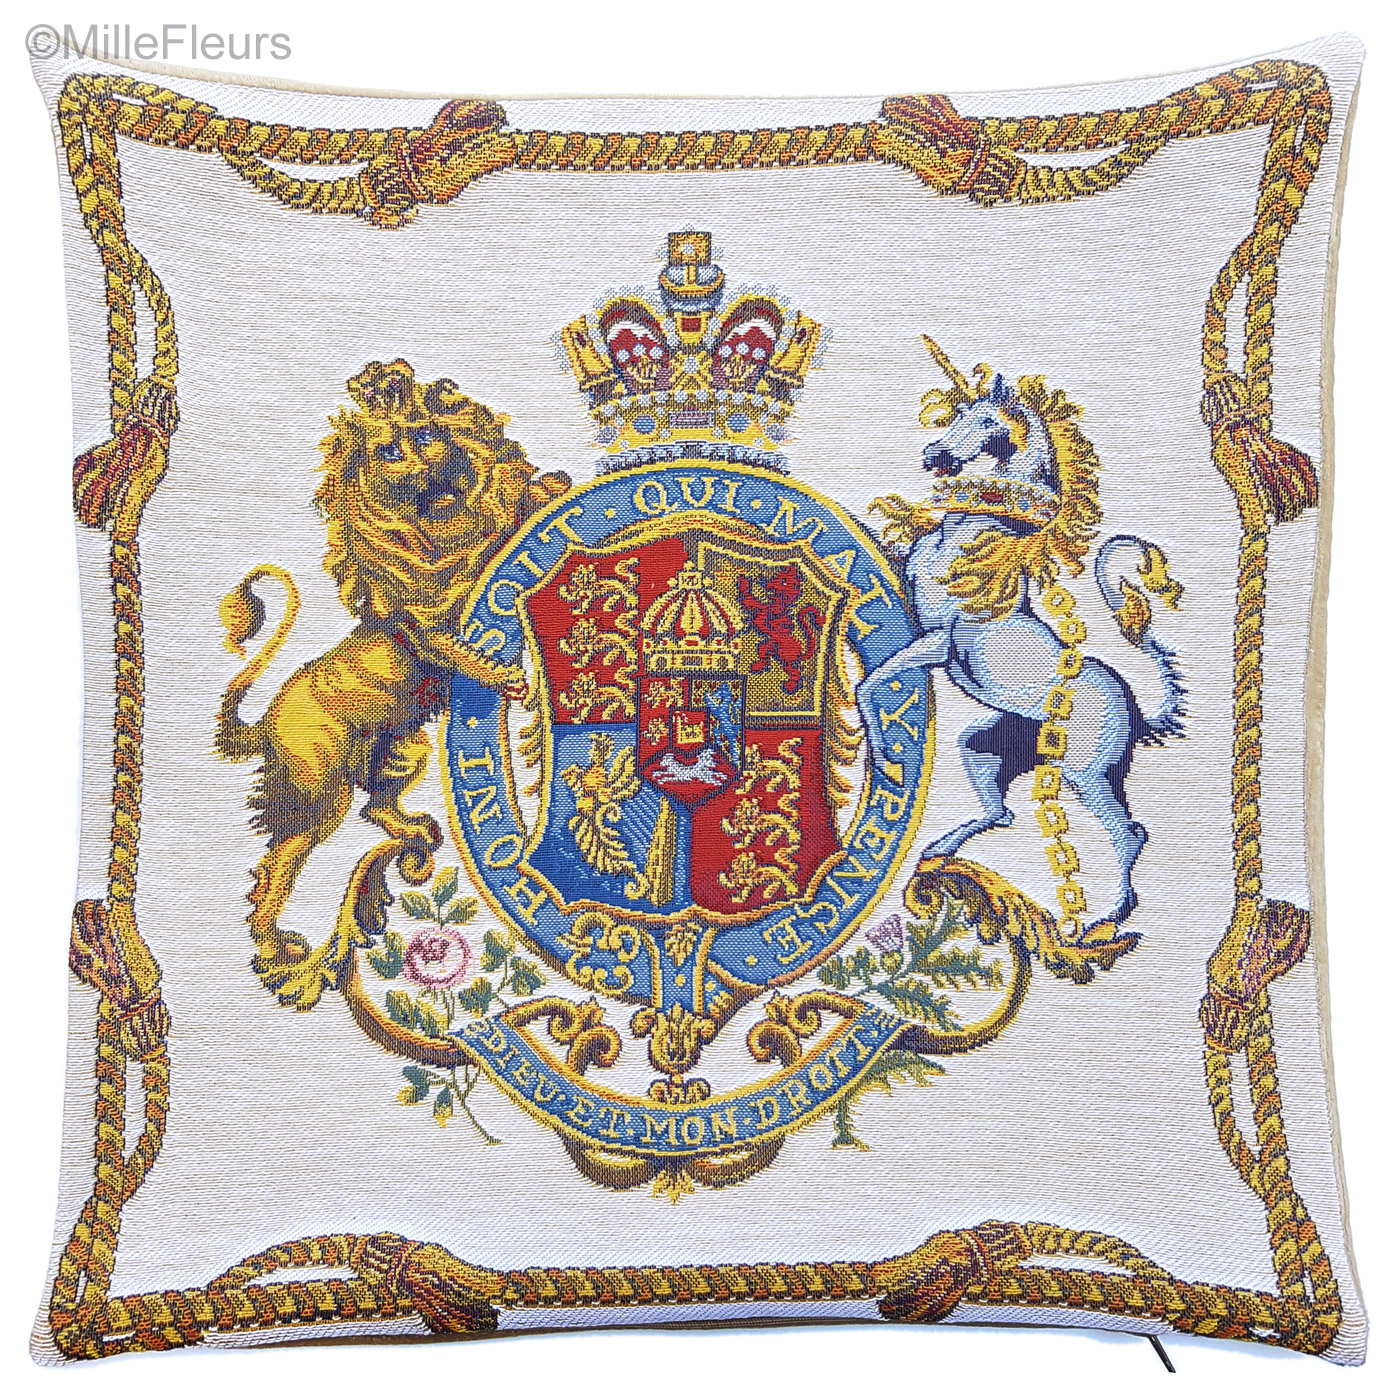 Royal Army Medical Corps  Heraldic Needlepoint Cushion Cover Tapestry Handmade 